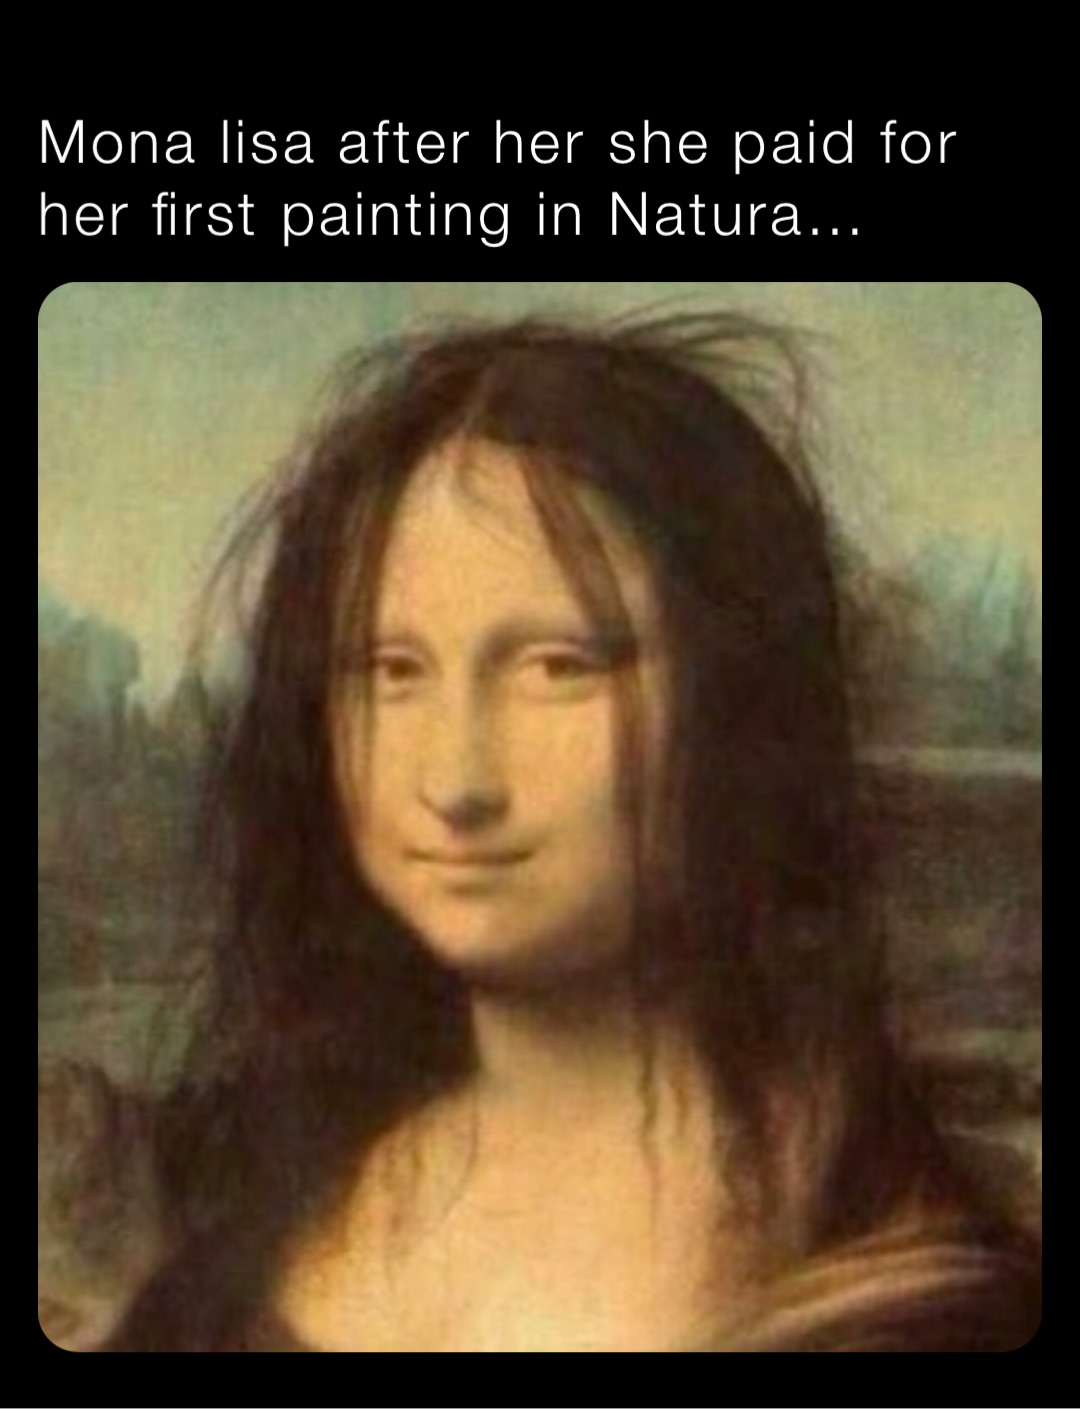 Mona lisa after her she paid for her first painting in Natura… |  @Vychod_radek | Memes